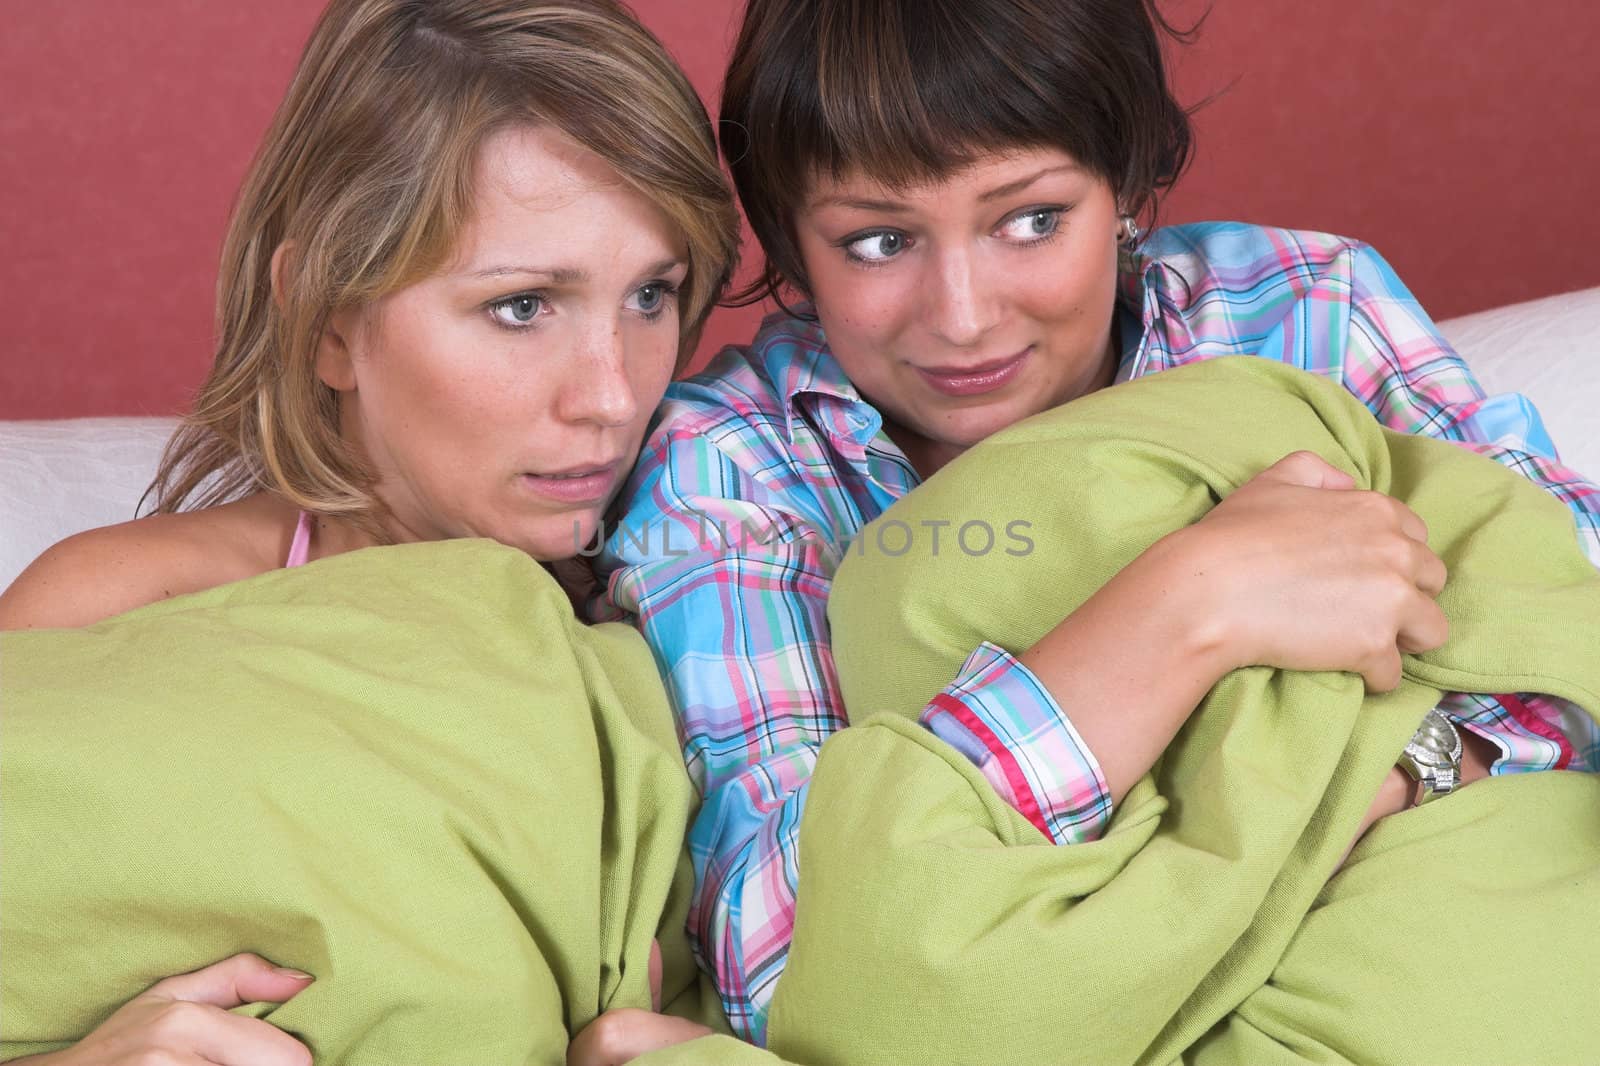 Two girls watching a scary movie together while hiding behind big pillows